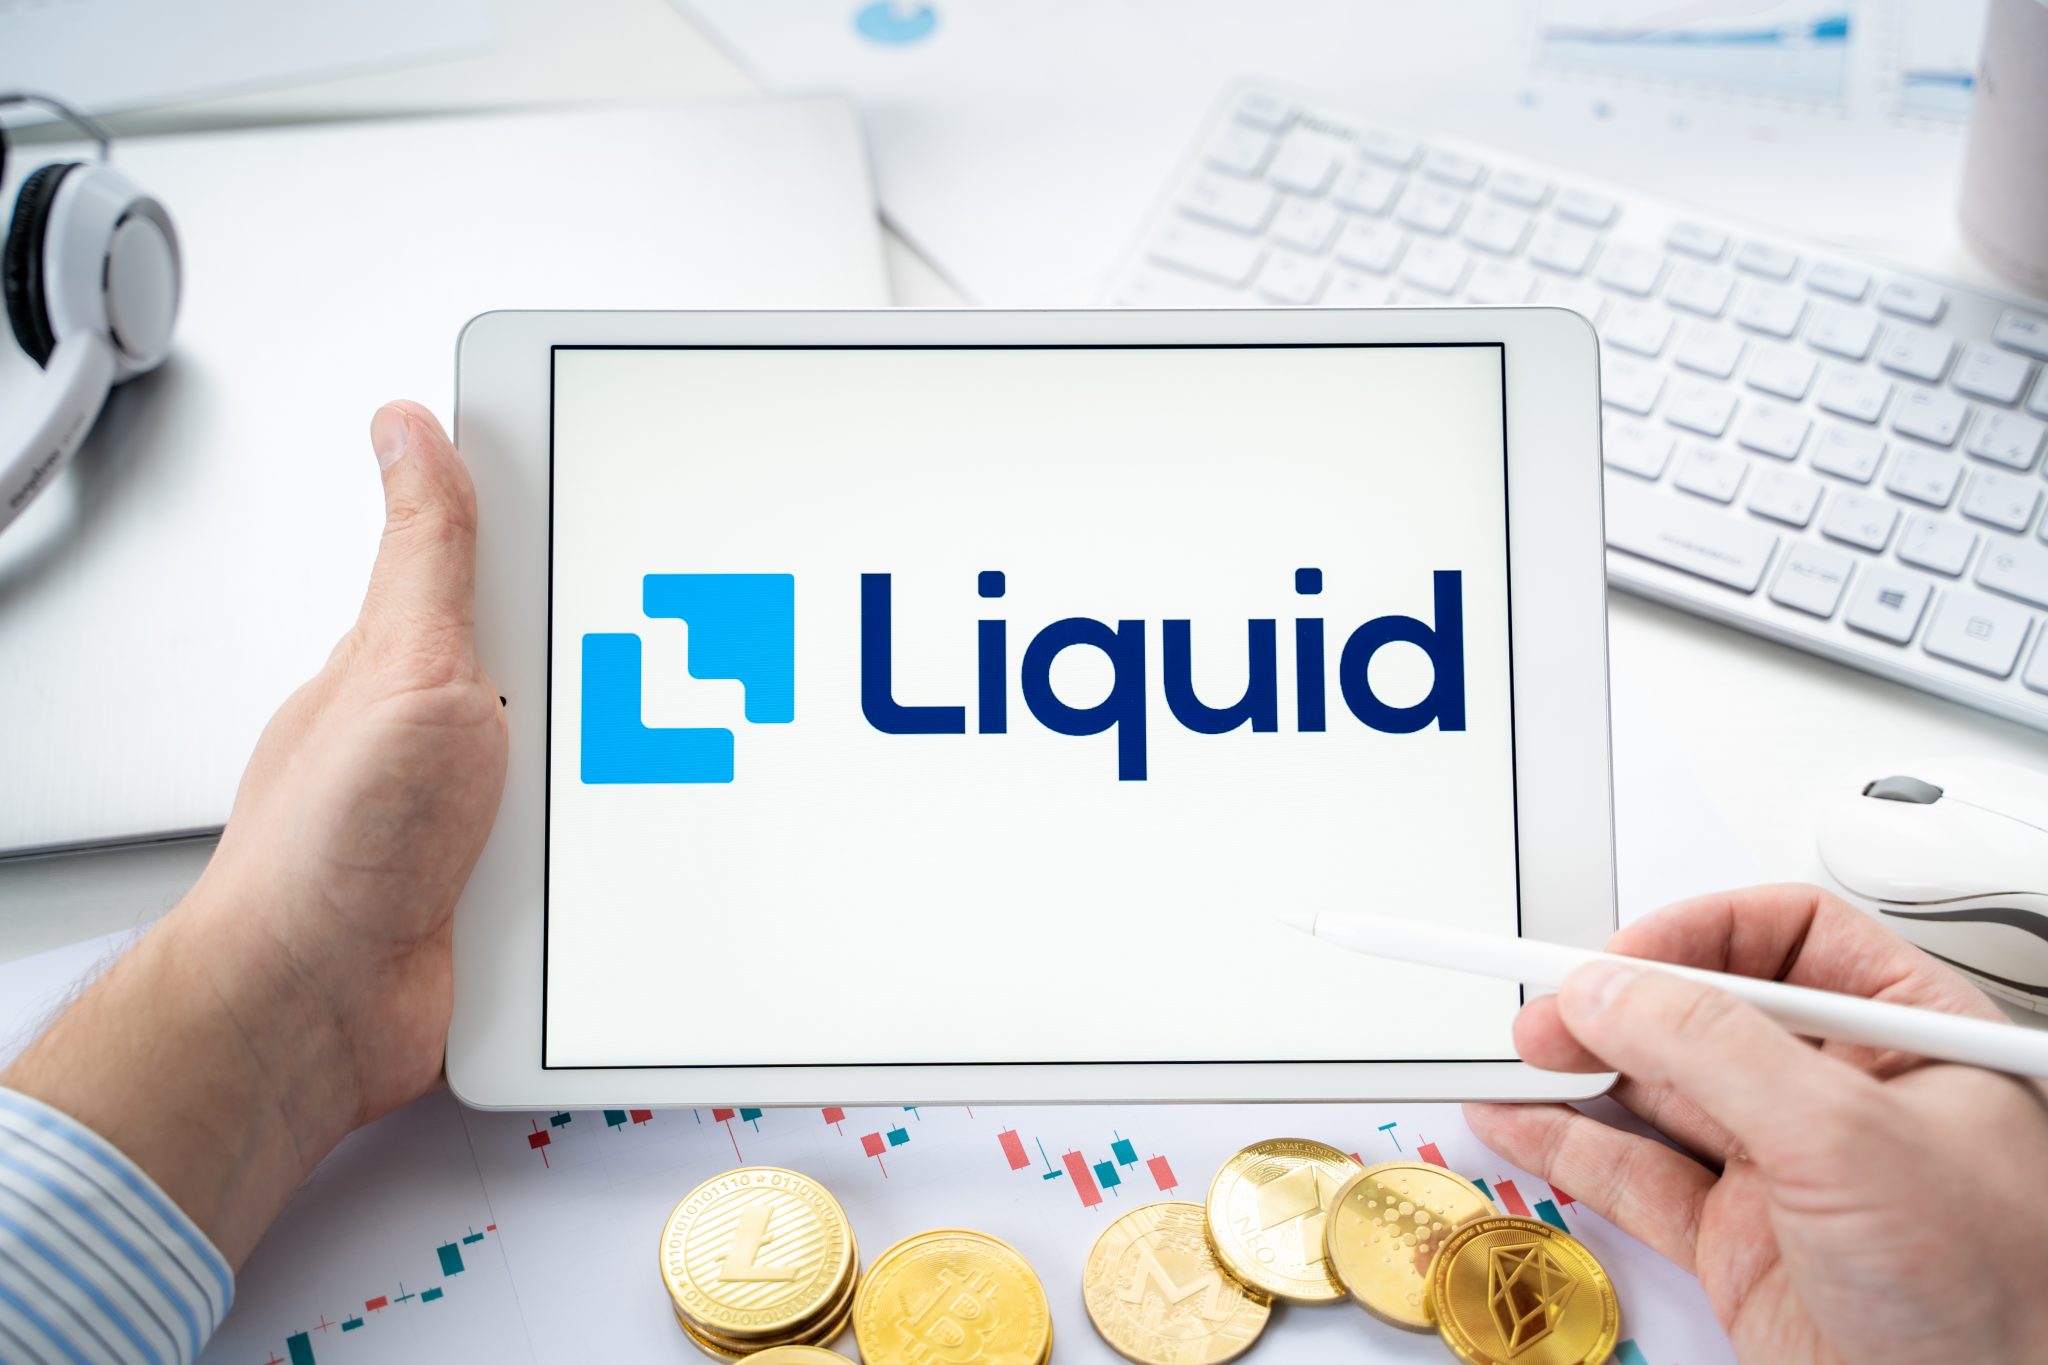 Russia Moscow 06.05.2021.Businessman with tablet.Logo of cryptocurrency stock exchange Liquid.Trading blockchain platform to buy,sell digital crypto coins,tokens Bitcoin,Ethereum.Business,investing.